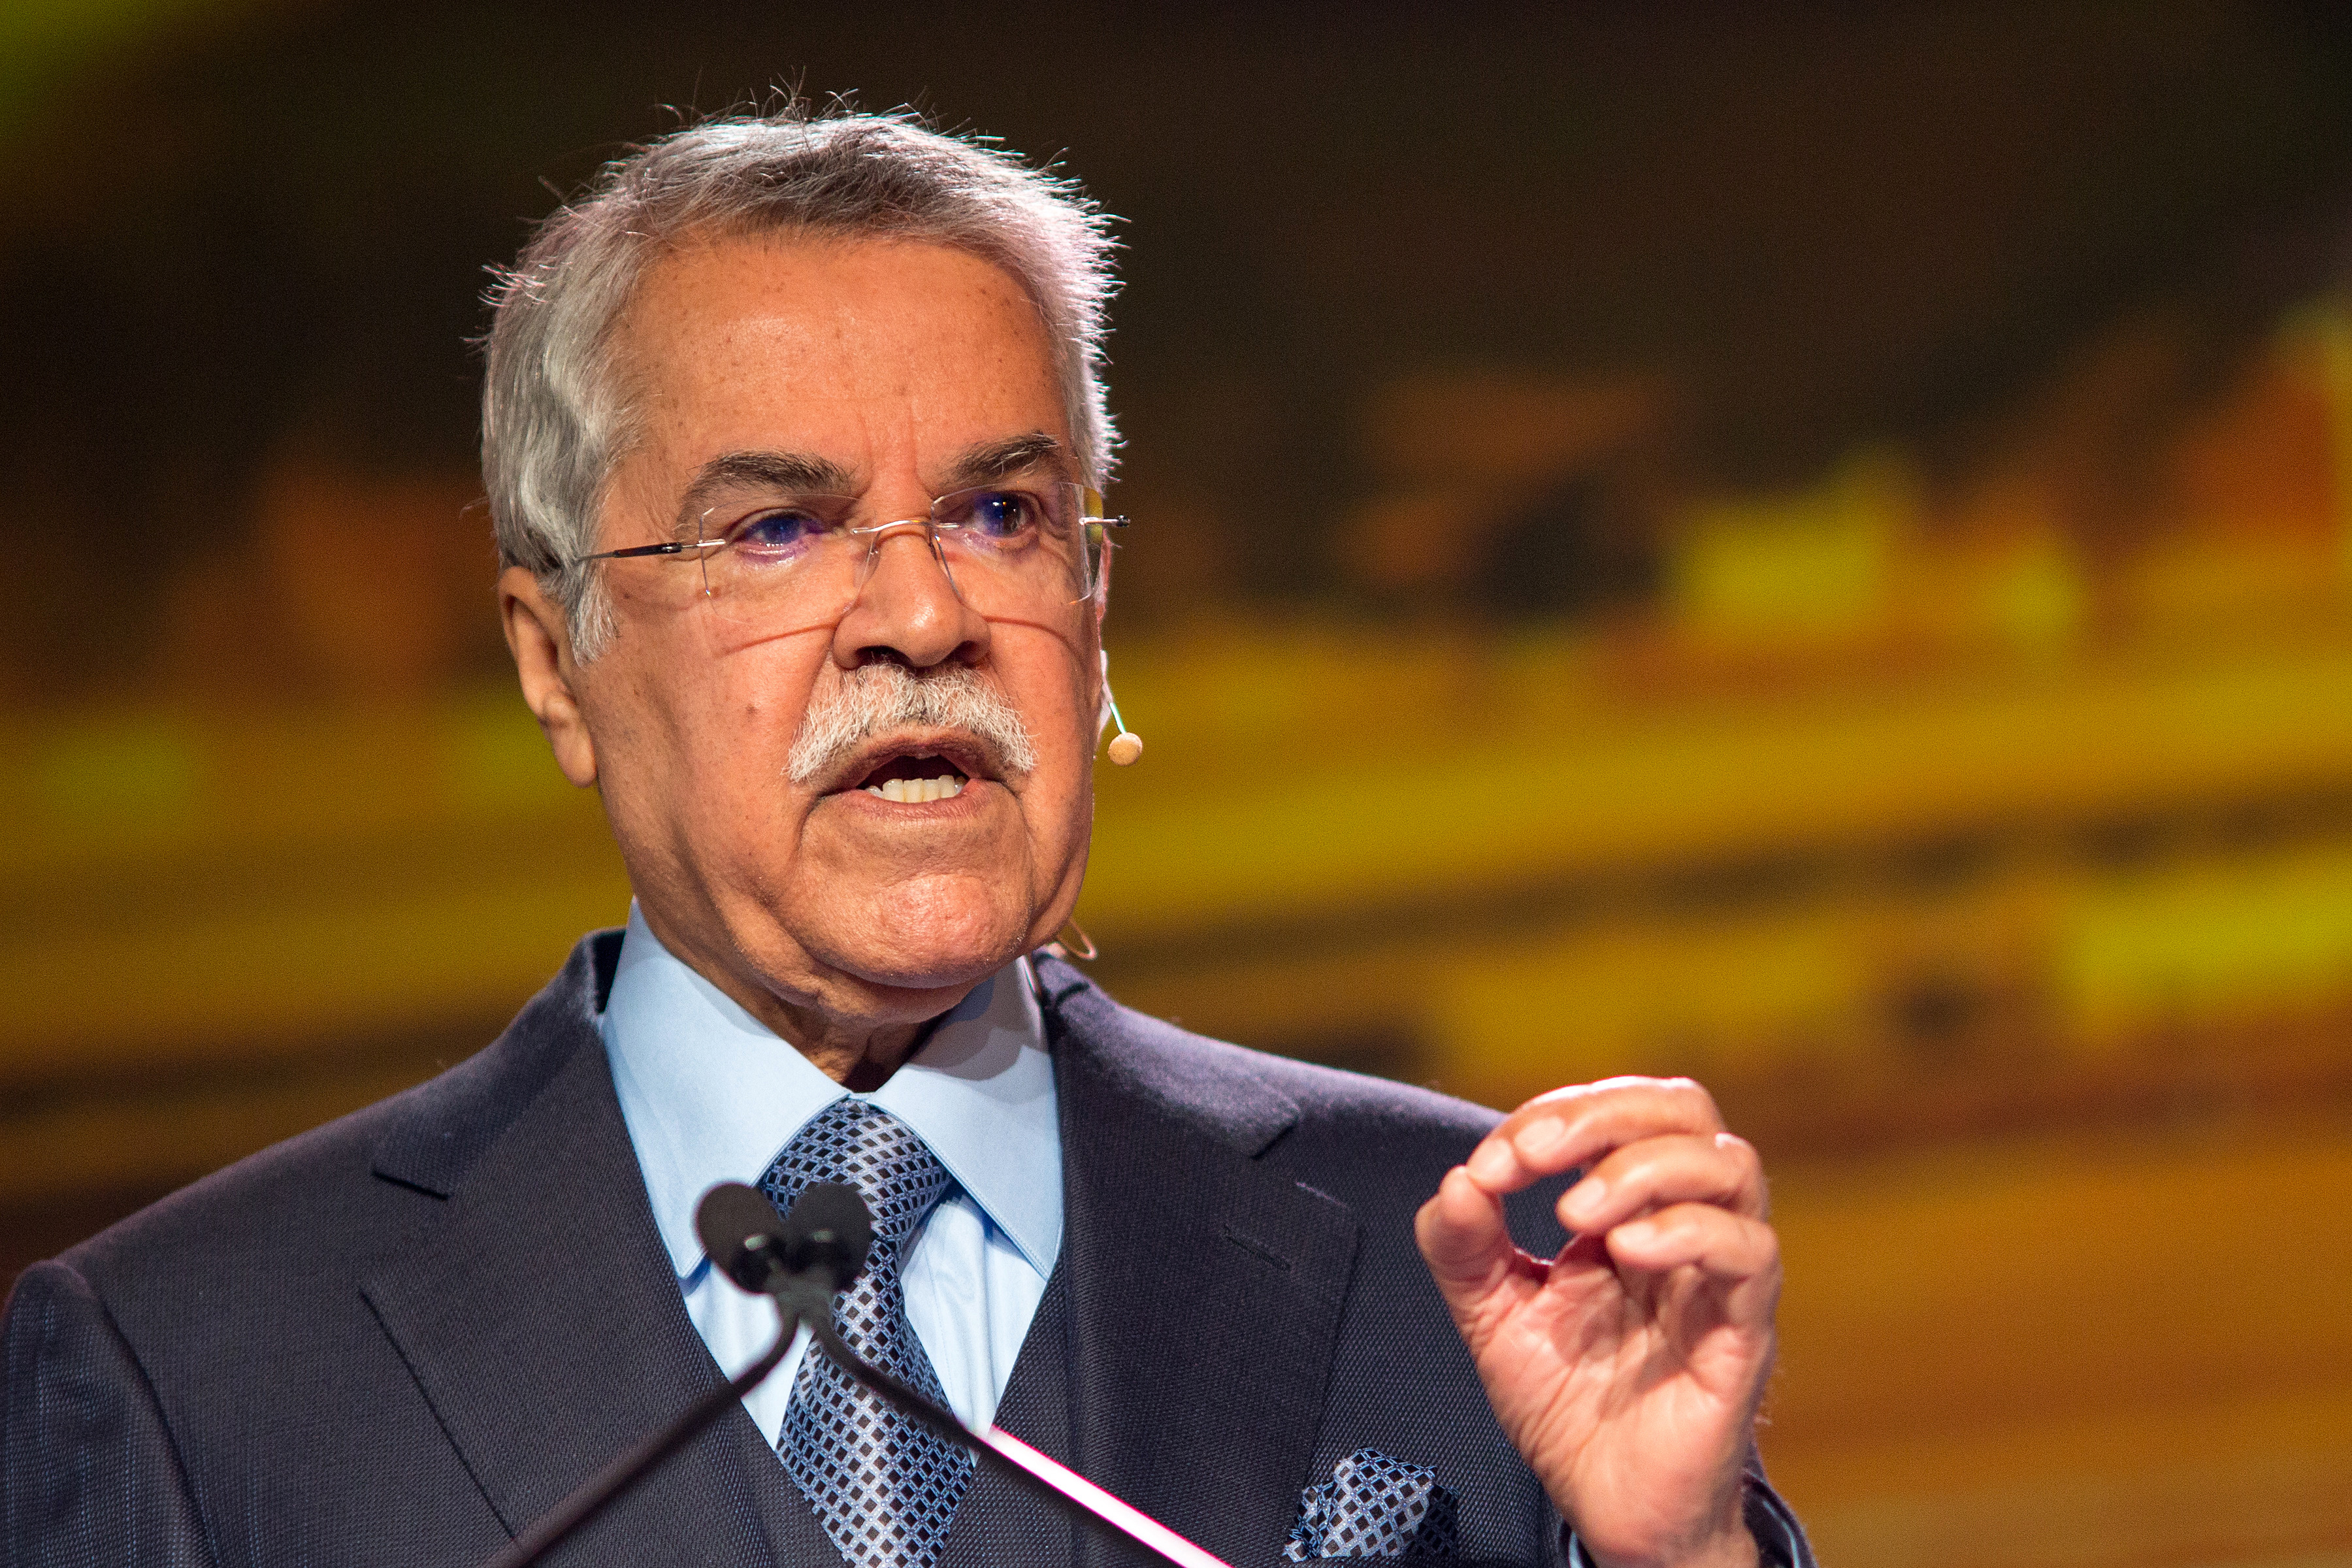 Ali Bin Ibrahim al-Naimi, Saudi Arabia's petroleum and mineral resources minister, speaks during the 2016 IHS CERAWeek conference in Houston on Feb. 23, 2016. (F. Carter Smith—Bloomberg via Getty Images)